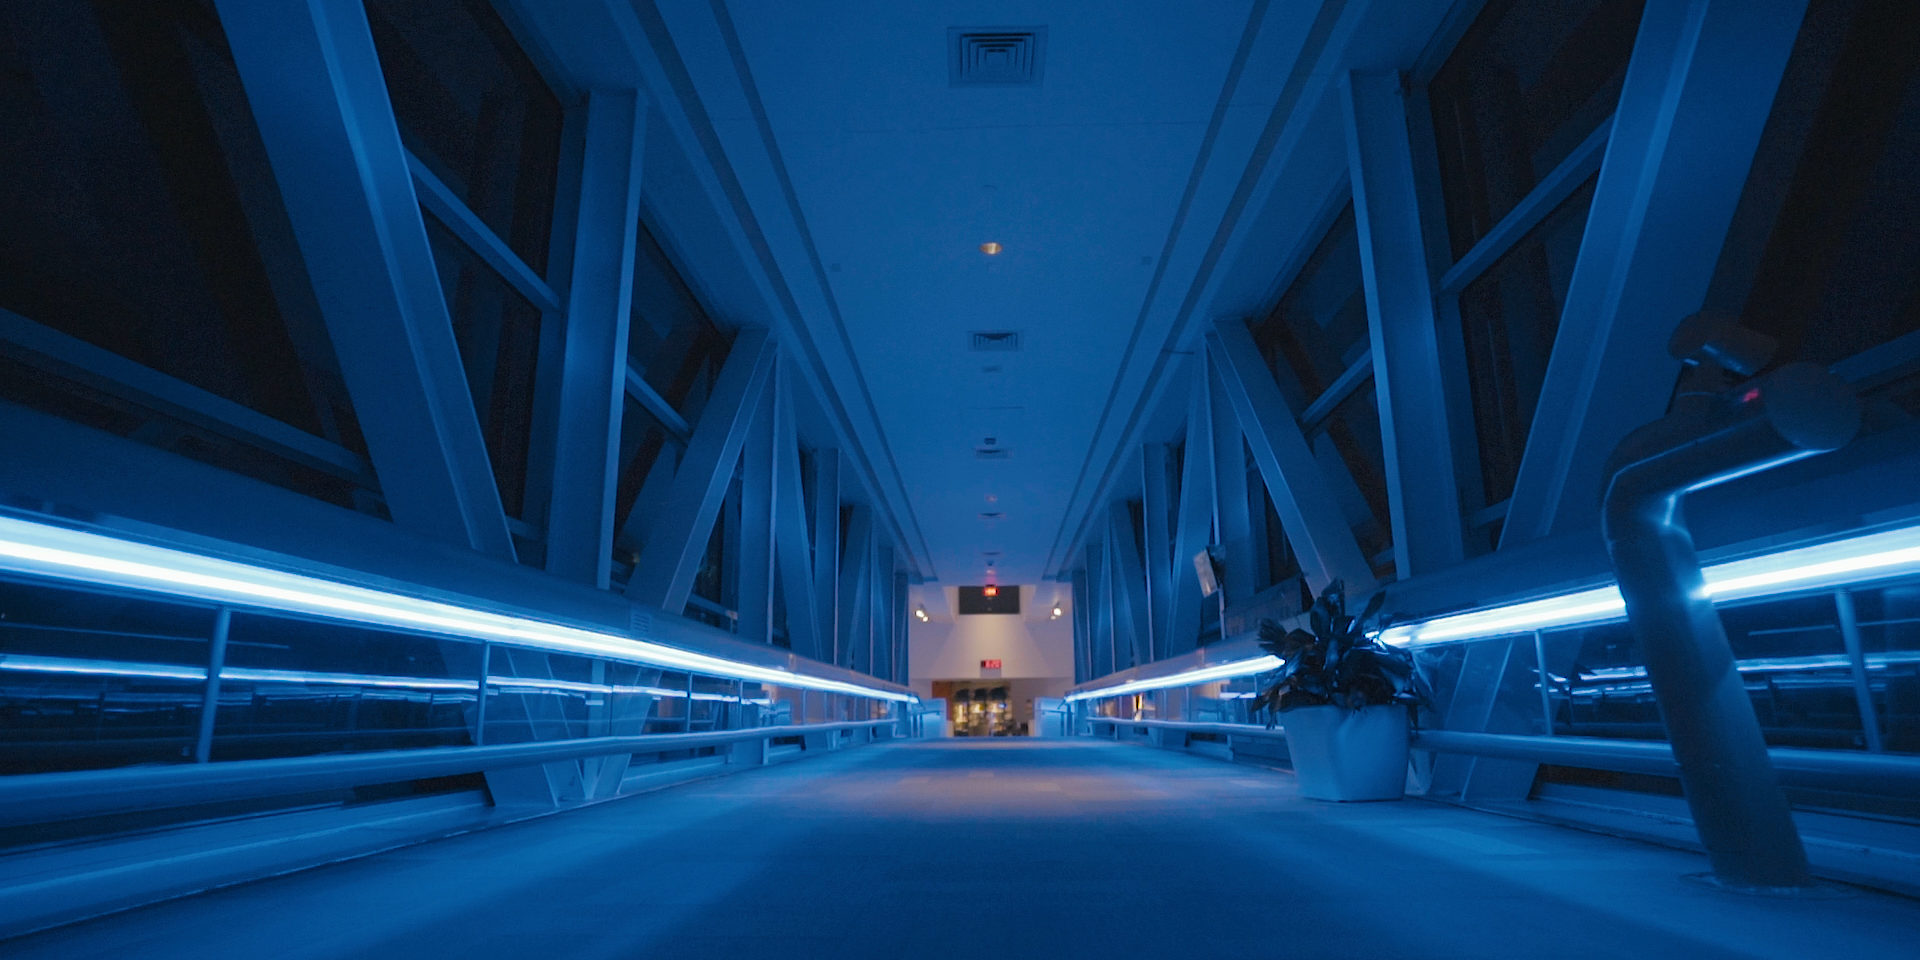 A blue lit skyway from the Planetarium to the St. Louis Science Center